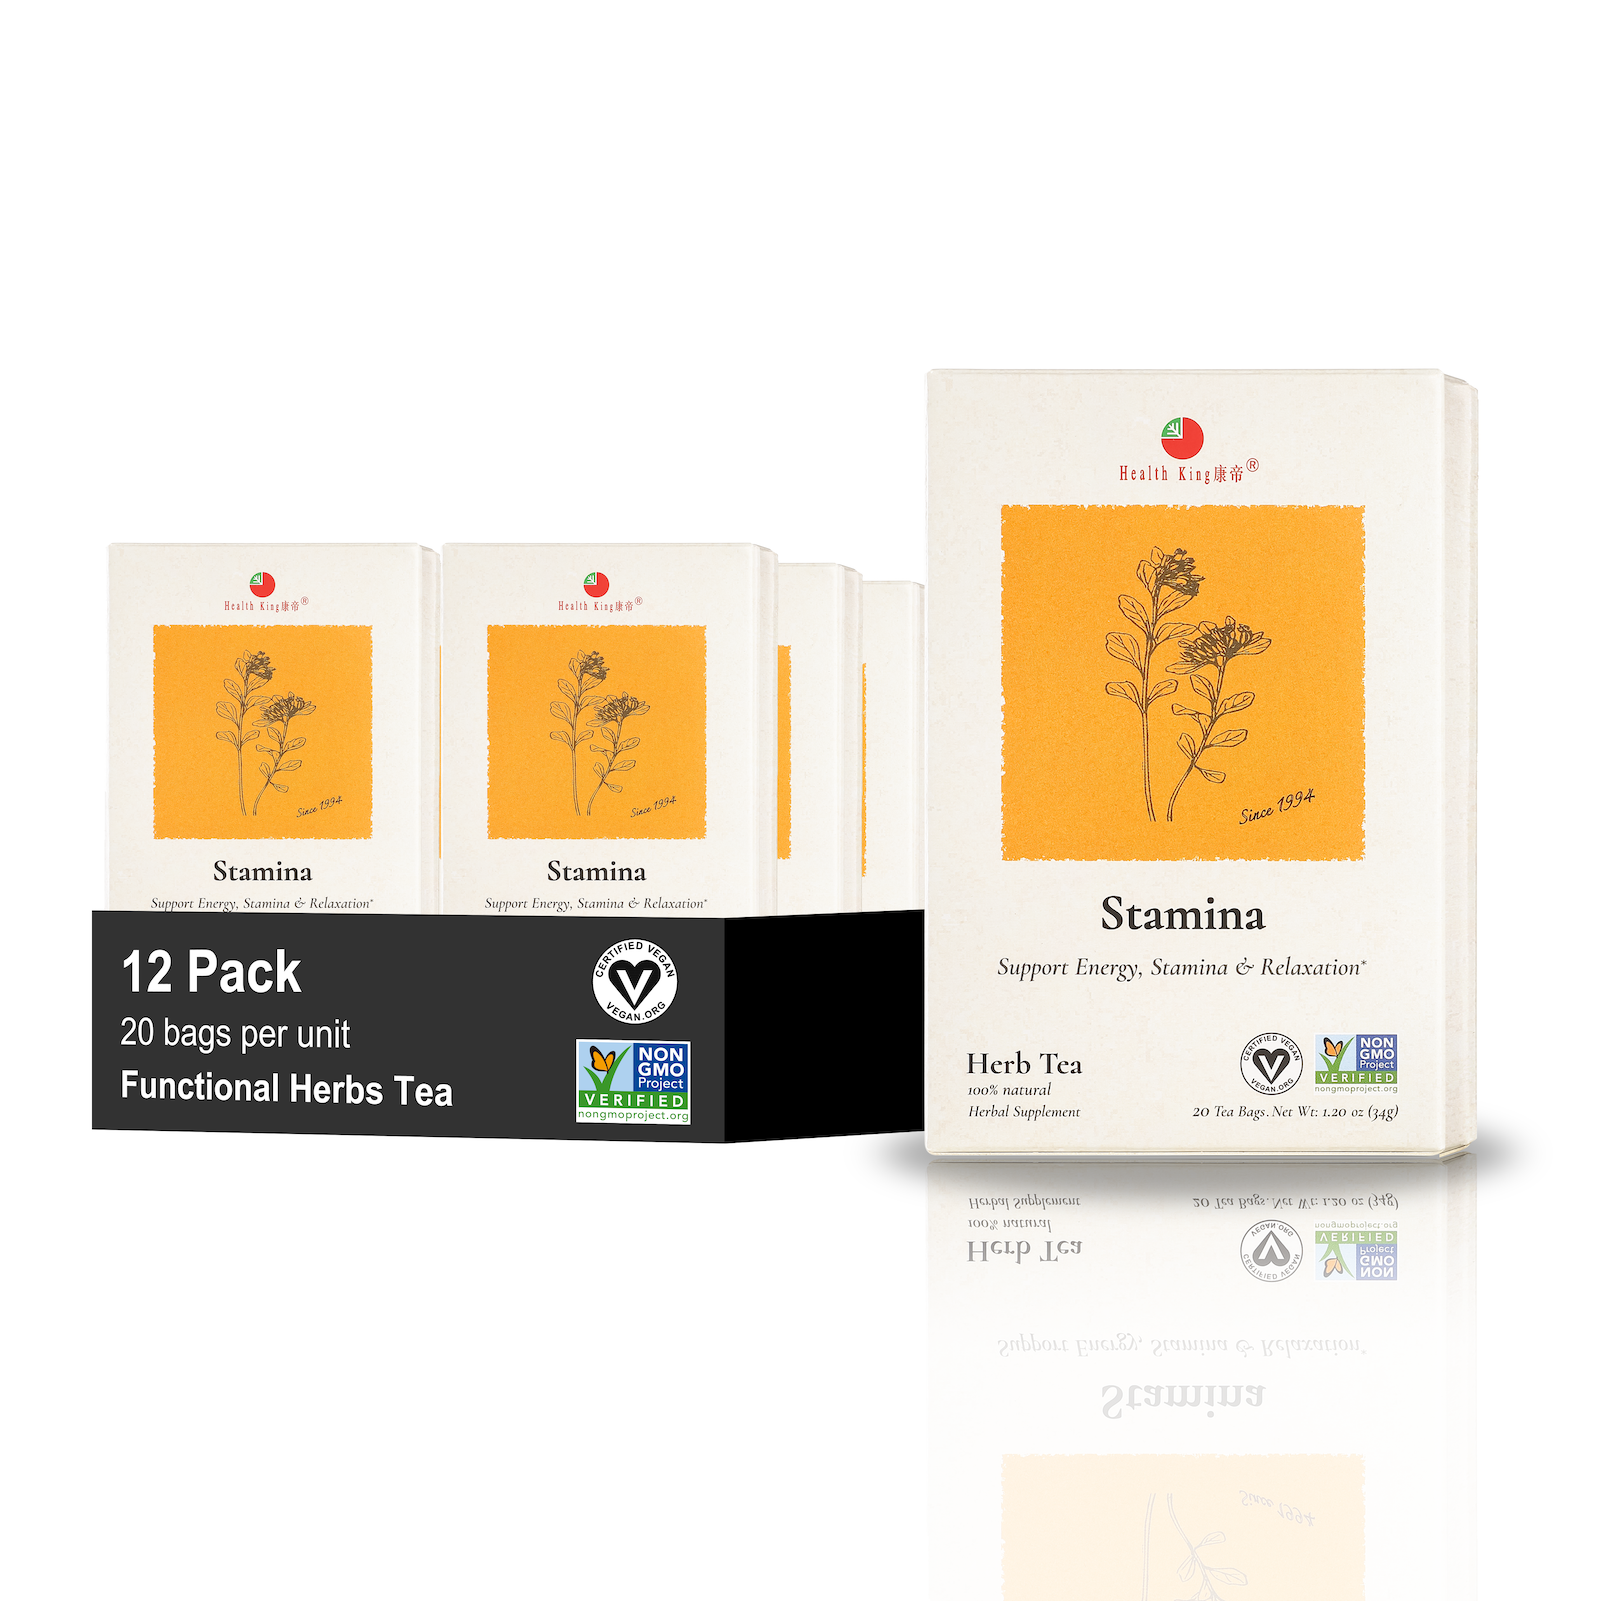 Pack of 12 Stamina Herb Tea bags promoting organic ingredients for relaxation